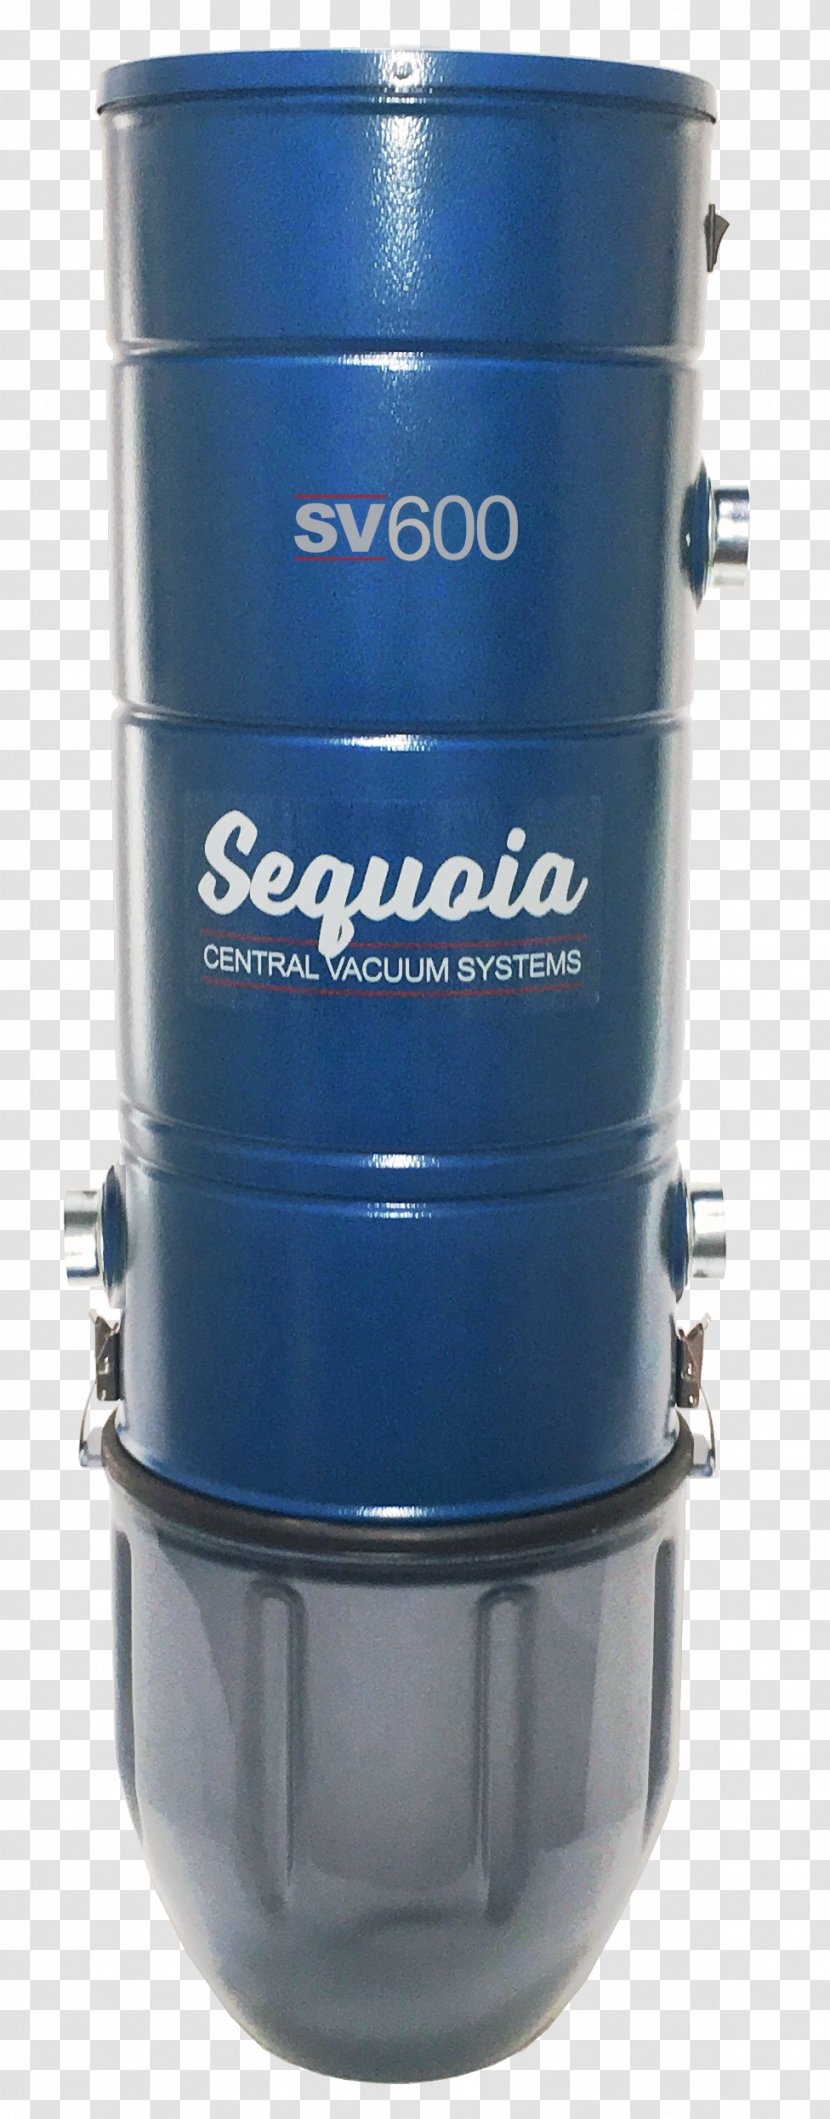 Central Vacuum Cleaner Northern California - Processing Unit Transparent PNG